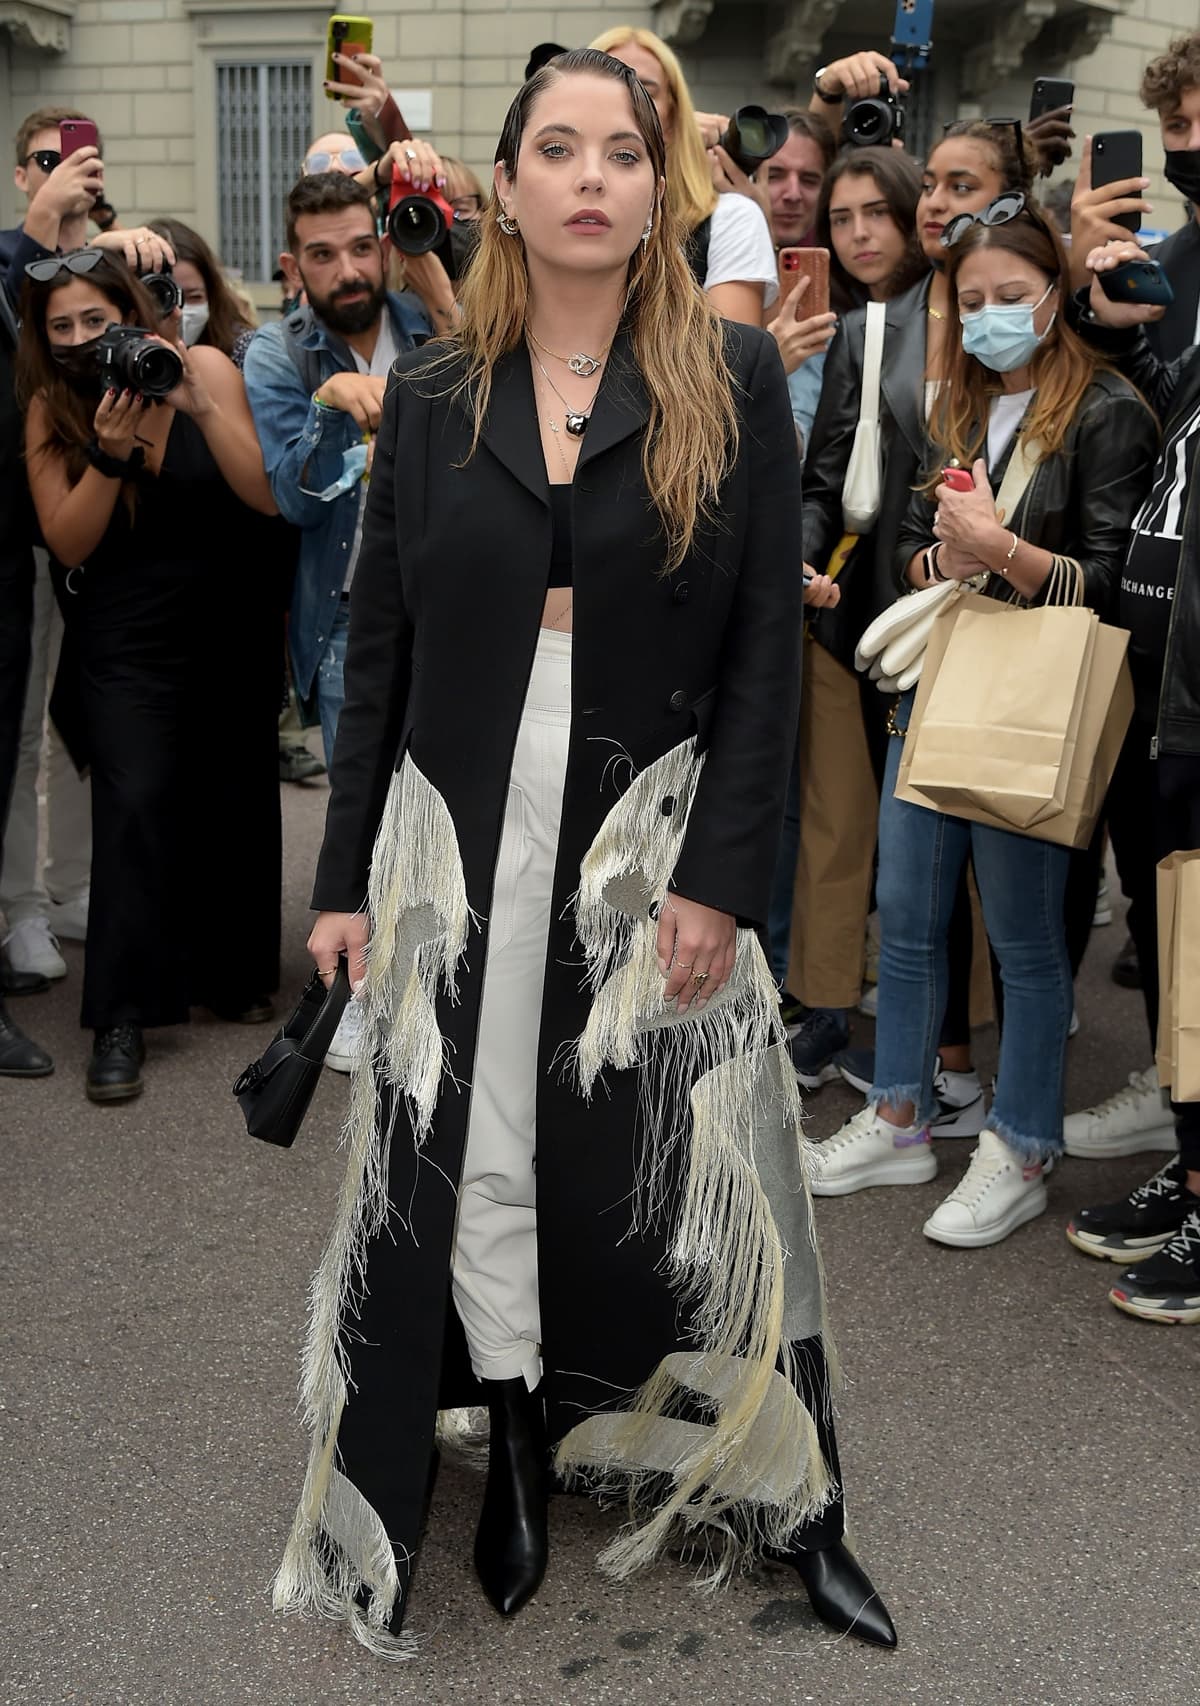 Ashley Benson in a fringe coat and black Chelsea boots during the Salvatore Ferragamo fashion show